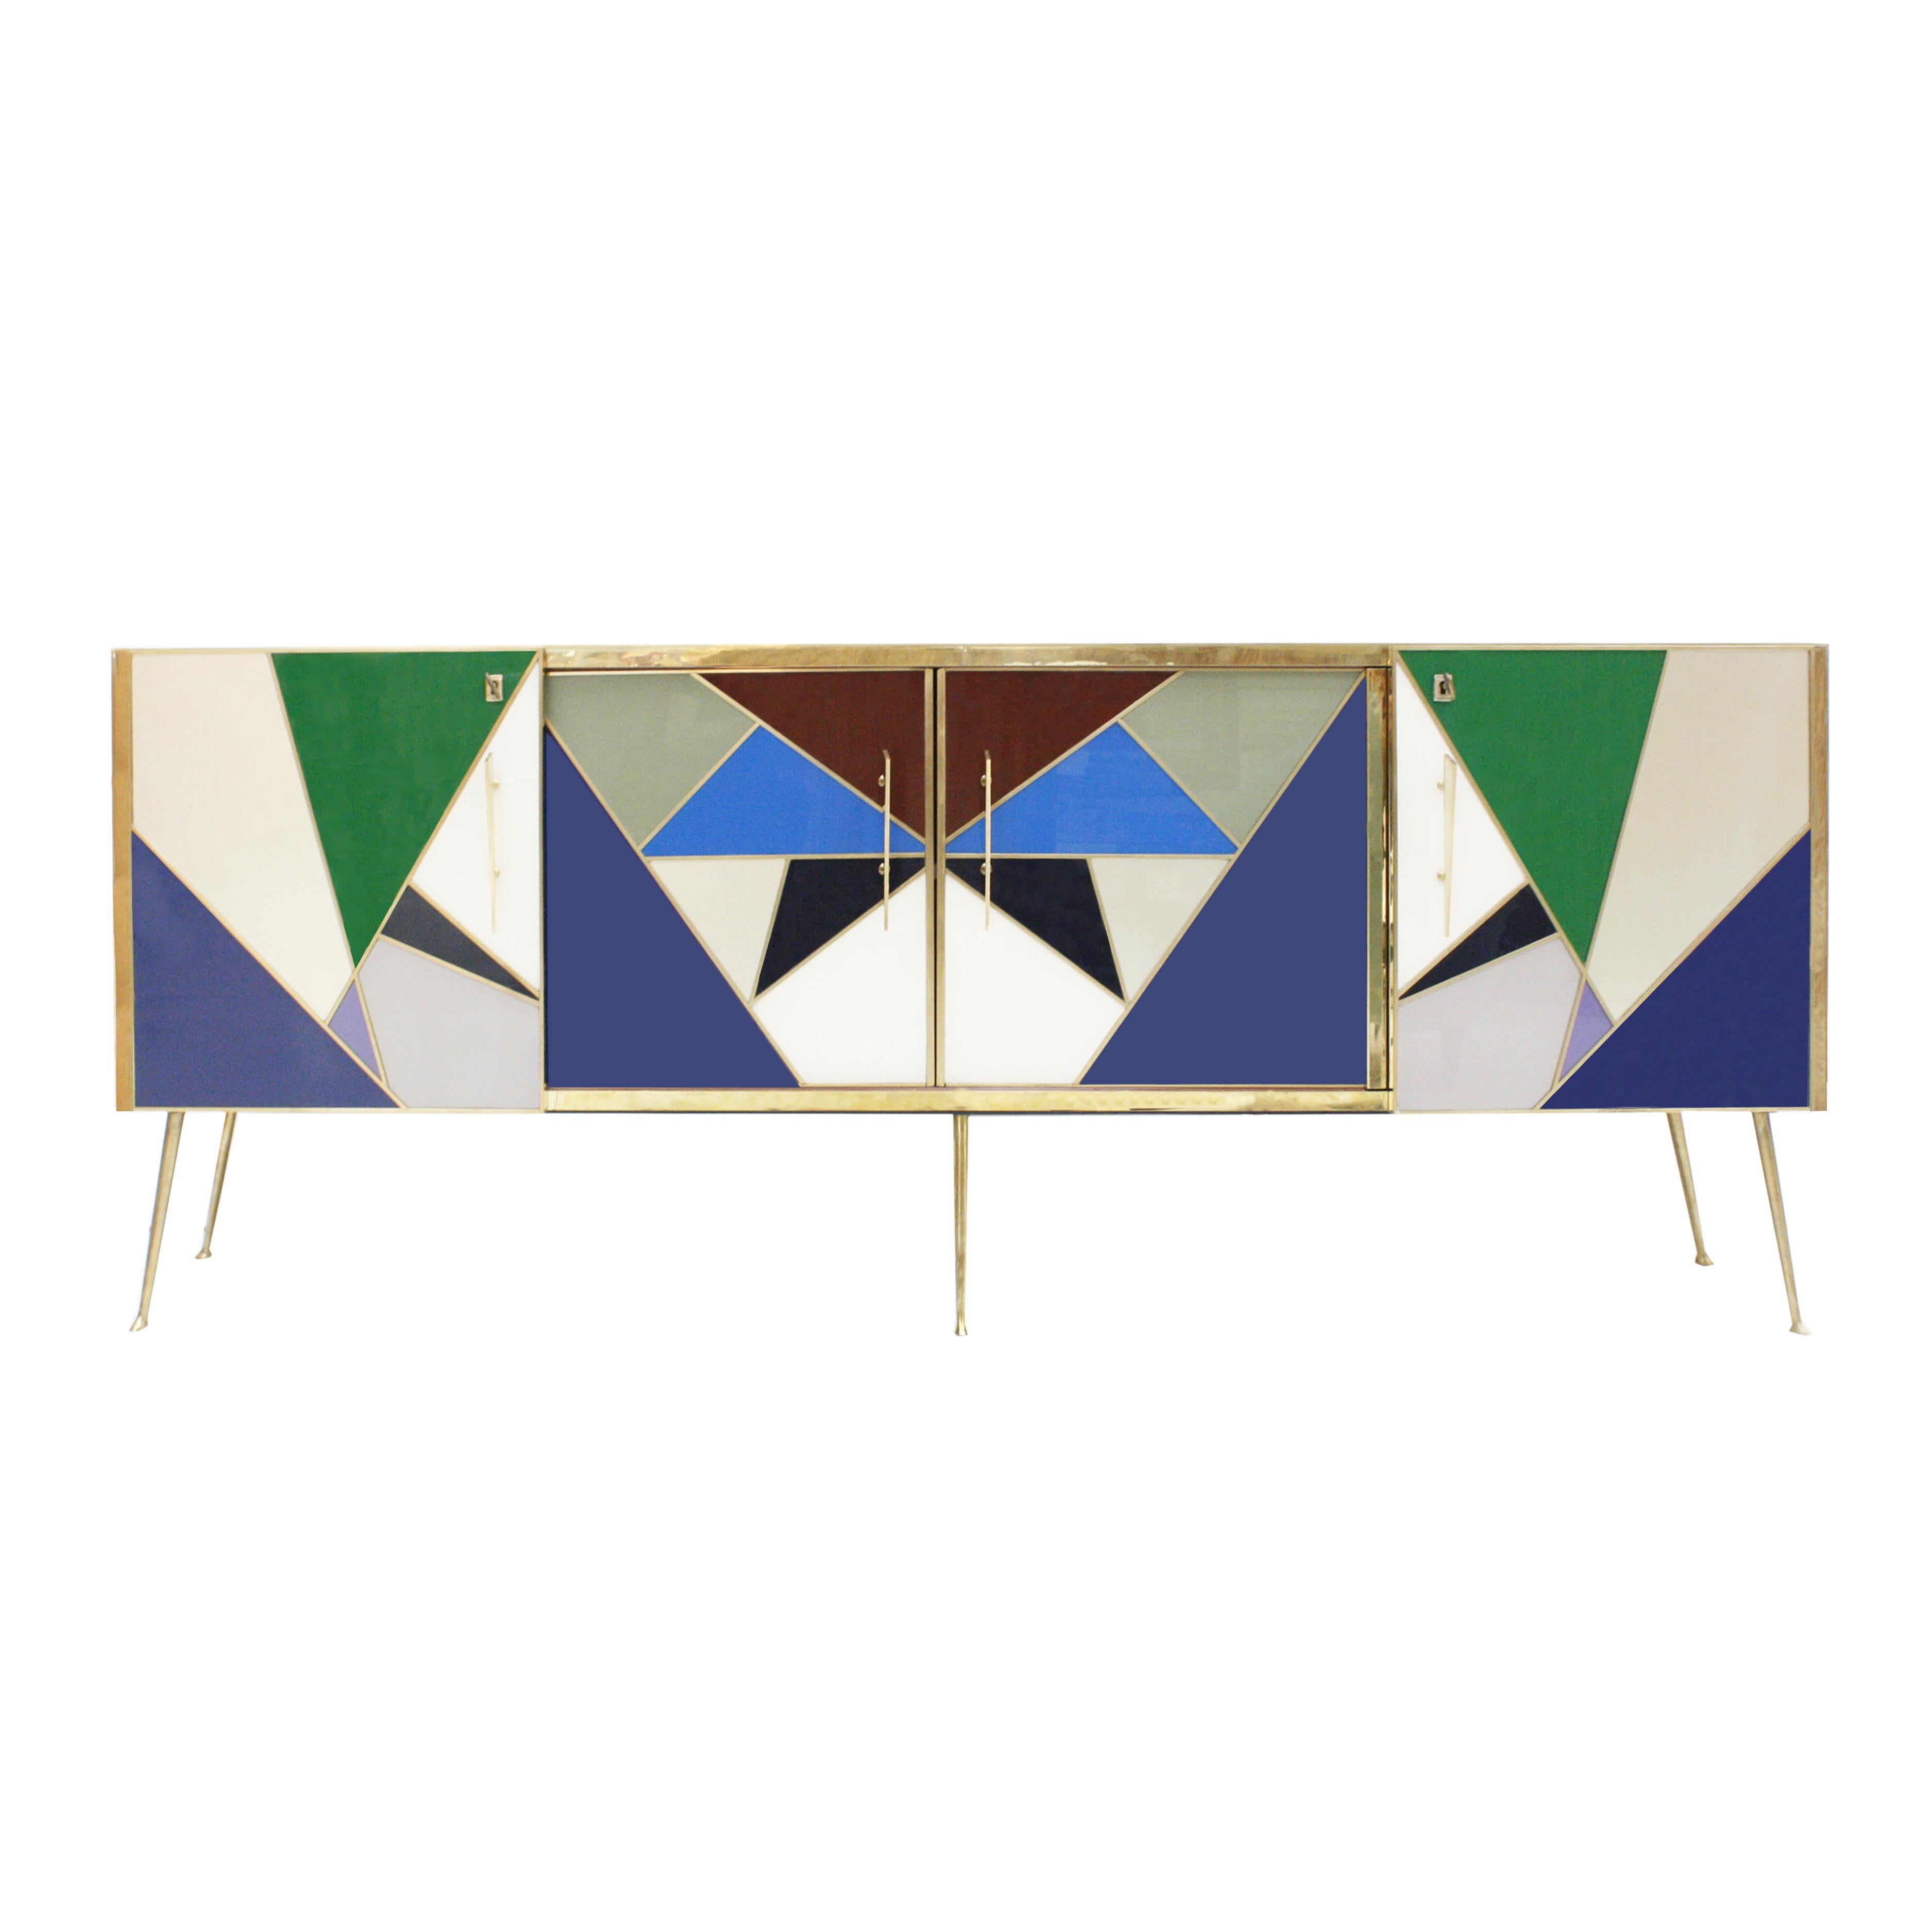 Italian sideboard designed by L.A. Studio. Composed of two central sliding doors and two folding doors on the sides. Made of solid wood structure, covered in colored glass. Brass profiles, handles and base. Made in Italy.

 
 